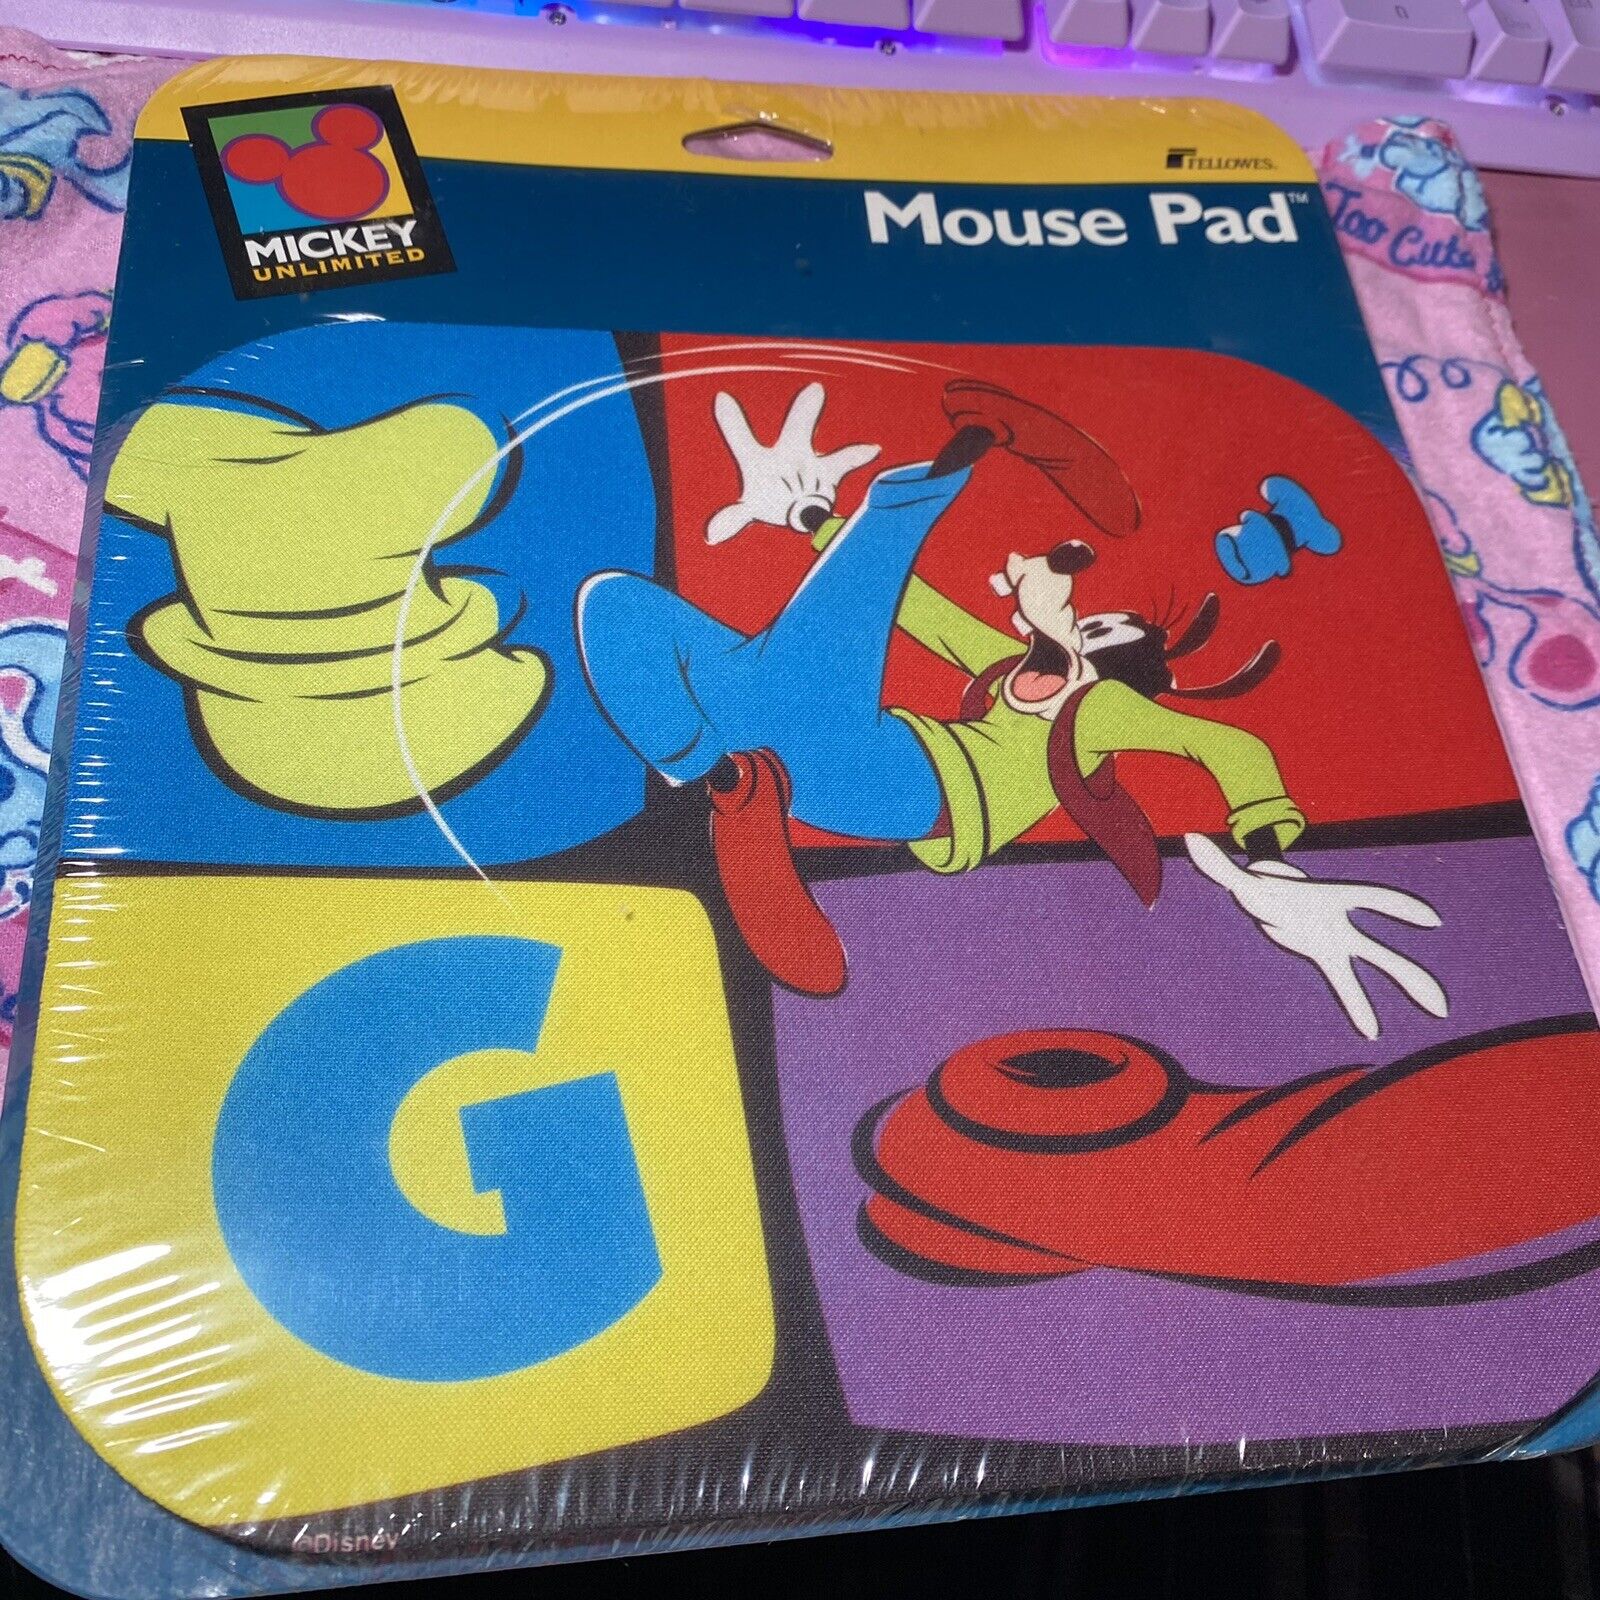 New Sealed 1996 Fellowes Mickey Unlimited Goofy 9” x 8” Mouse Pad Vintage